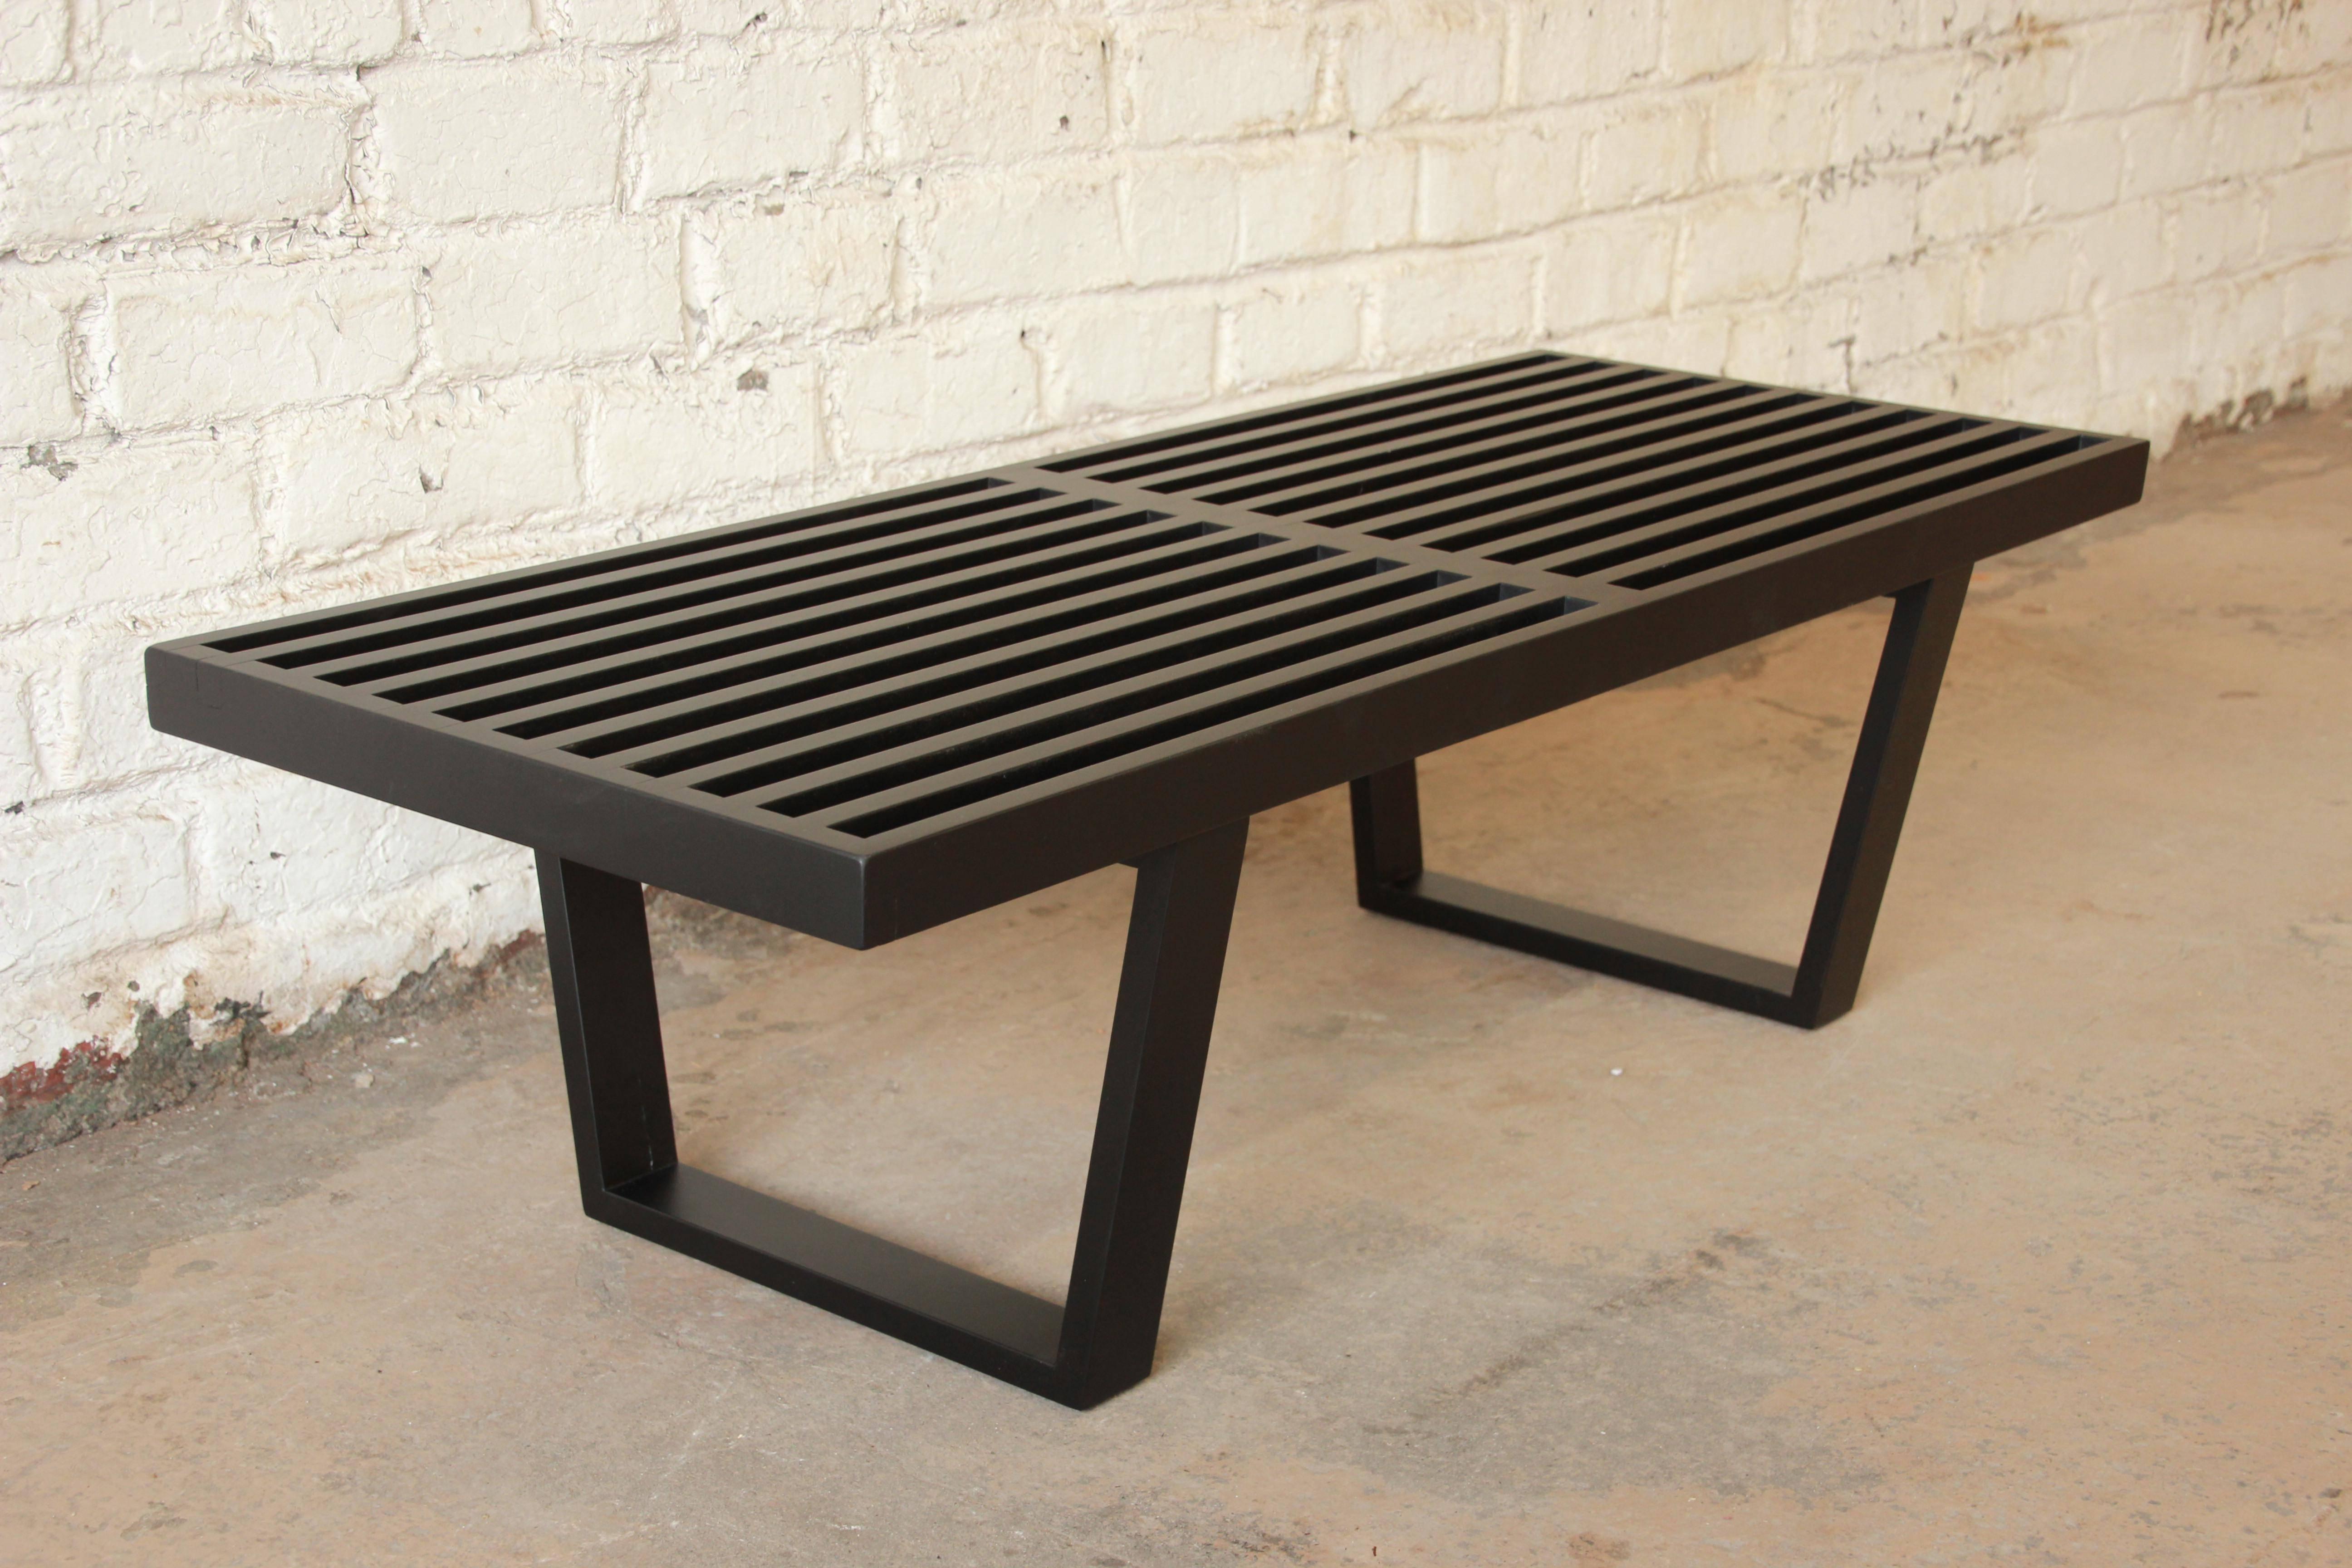 Early platform bench with cushion designed by George Nelson for Herman Miller. The bench has been professionally restored to its original black lacquer finish. The foam on the seat cushion is still in excellent condition, as well as the original